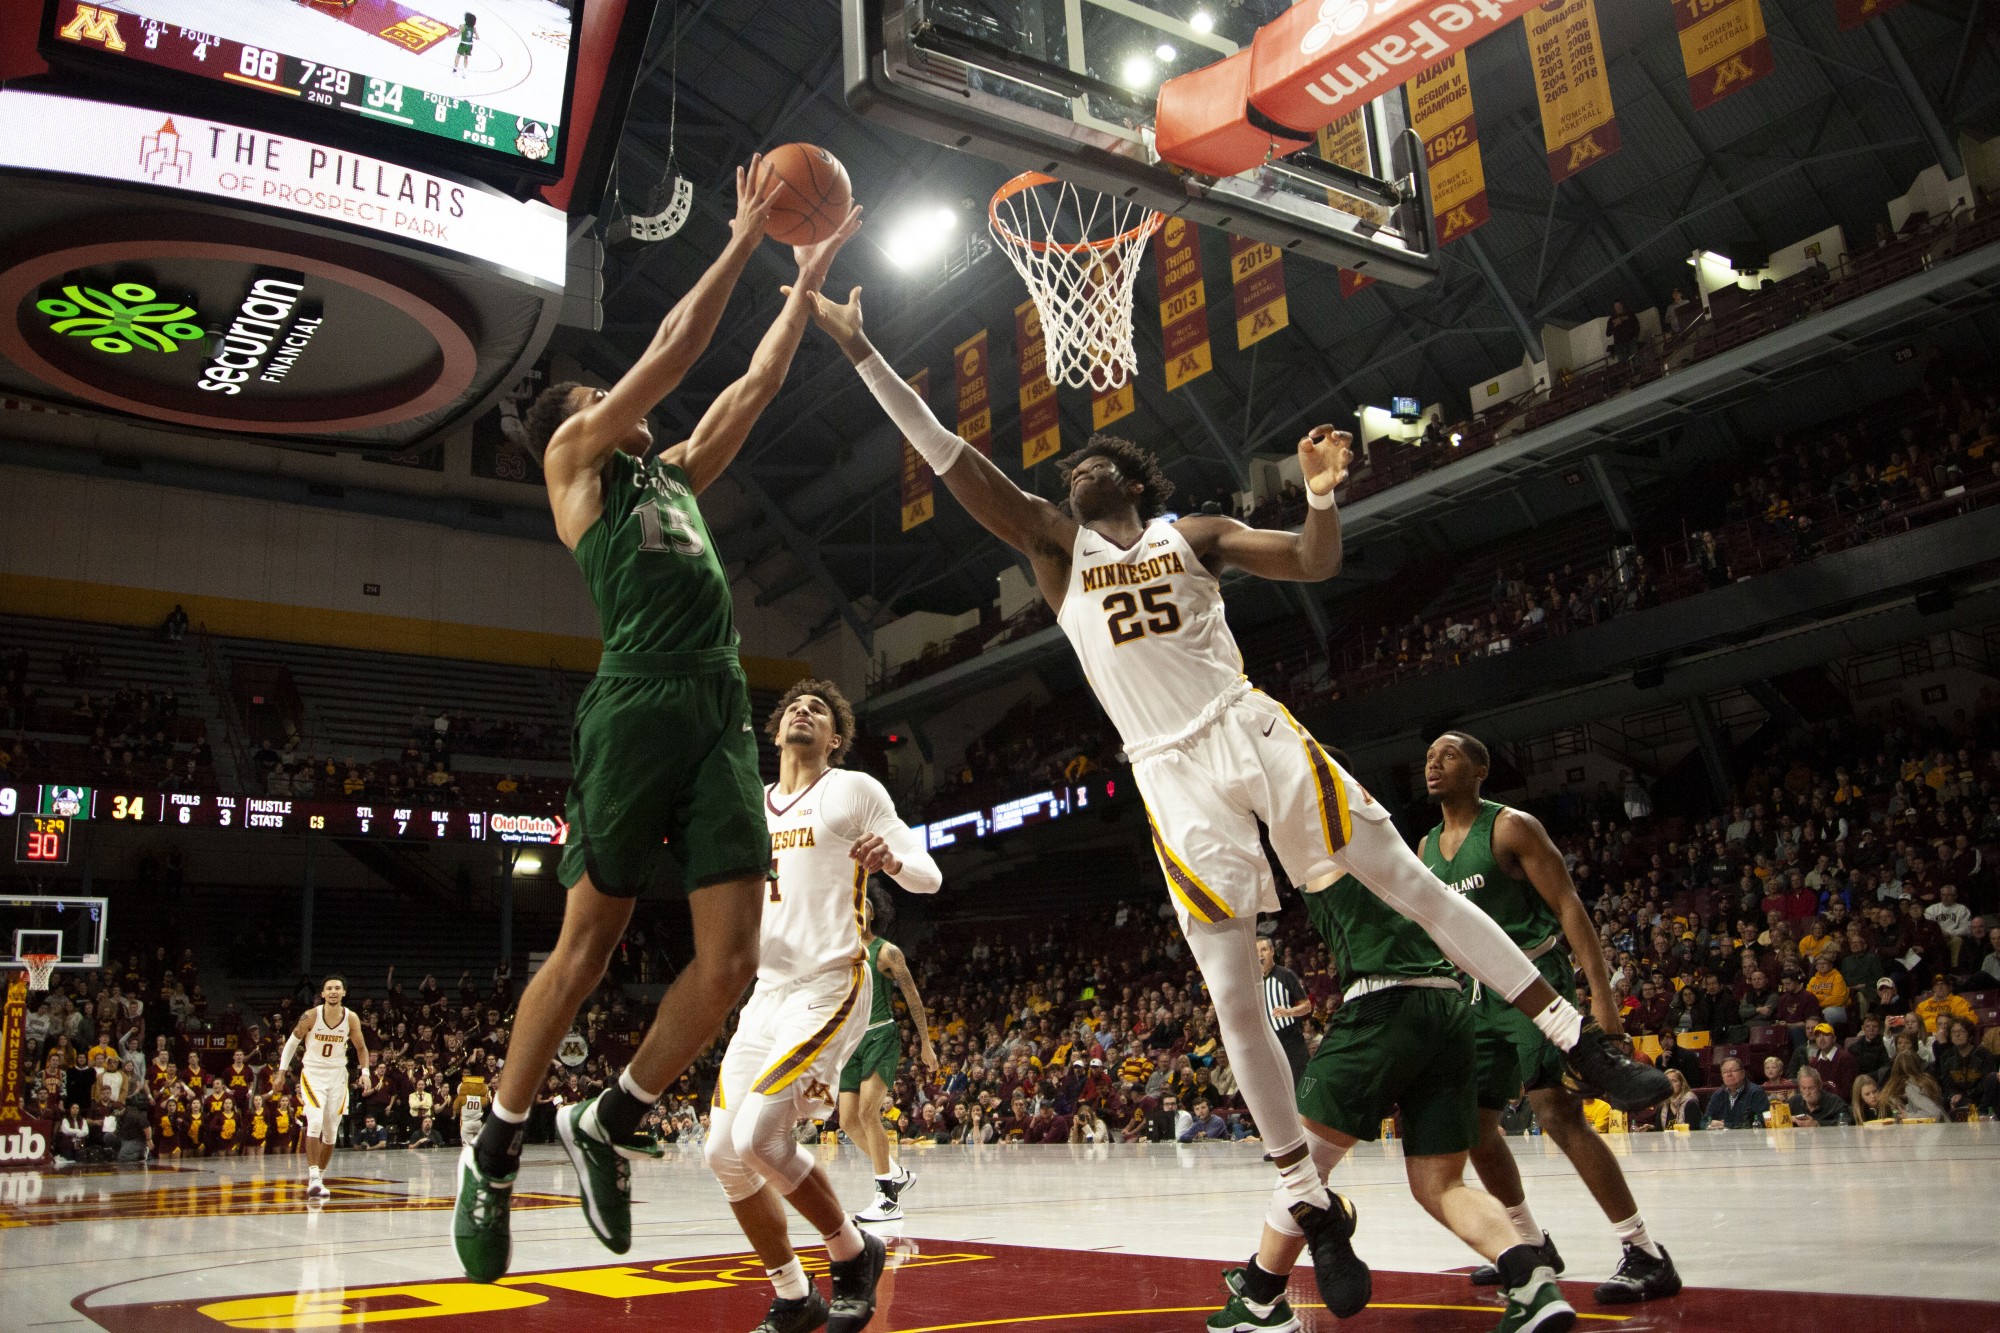 Center Daniel Oturu leaps to block an opponent at Williams Arena on Tuesday, Nov. 5. The Gophers went on to defeat Cleveland State 85-50. 